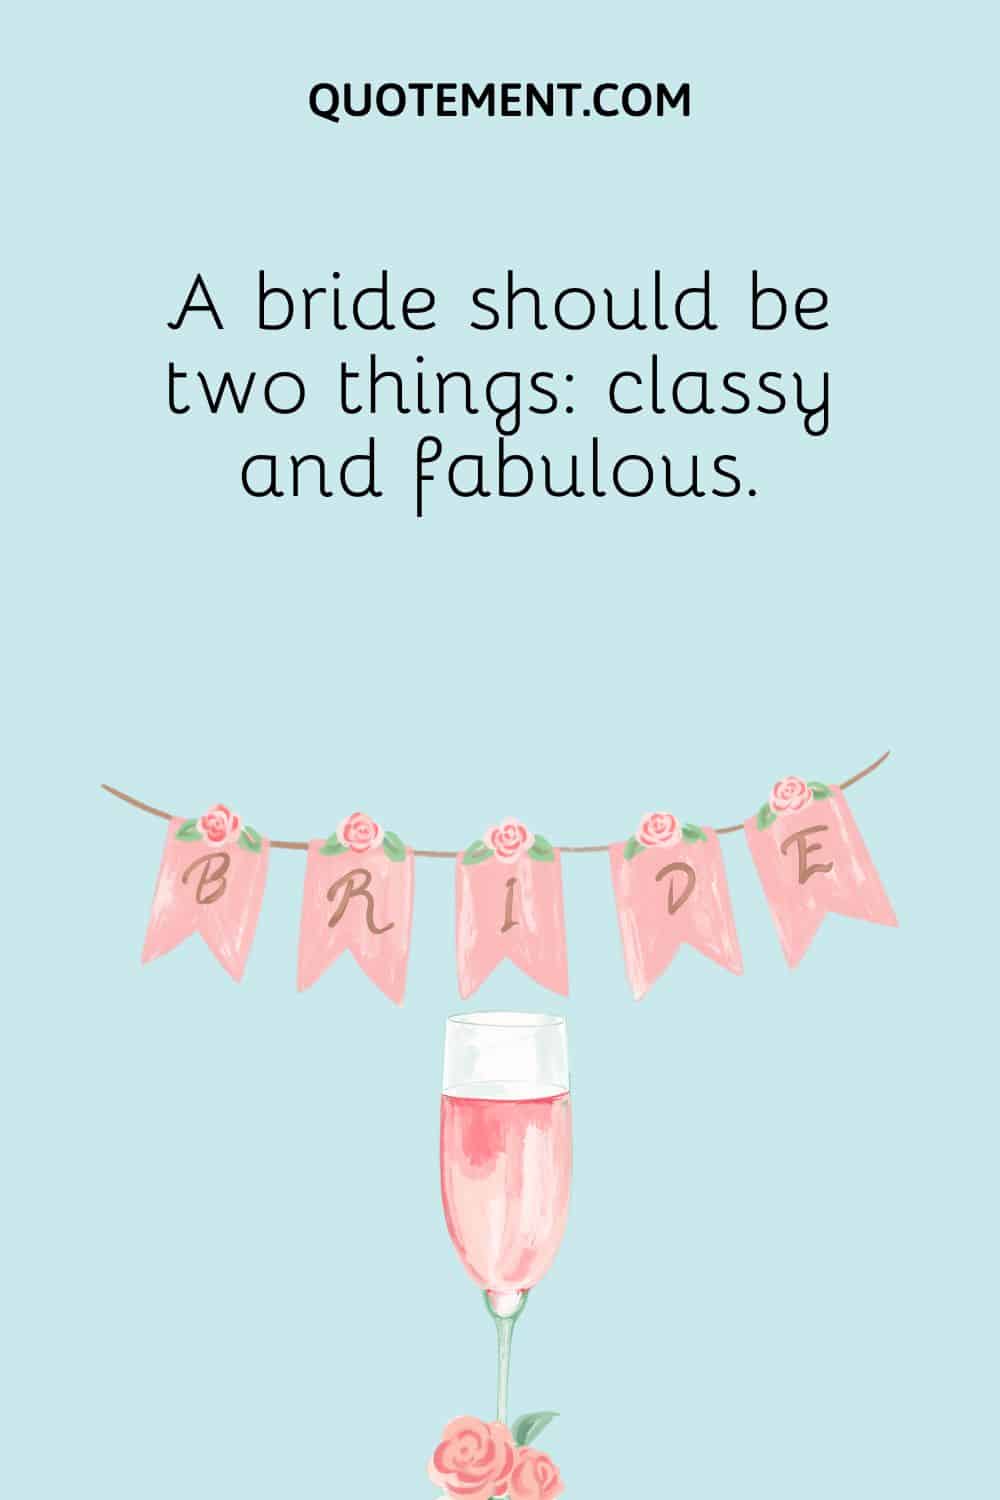 A bride should be two things classy and fabulous.